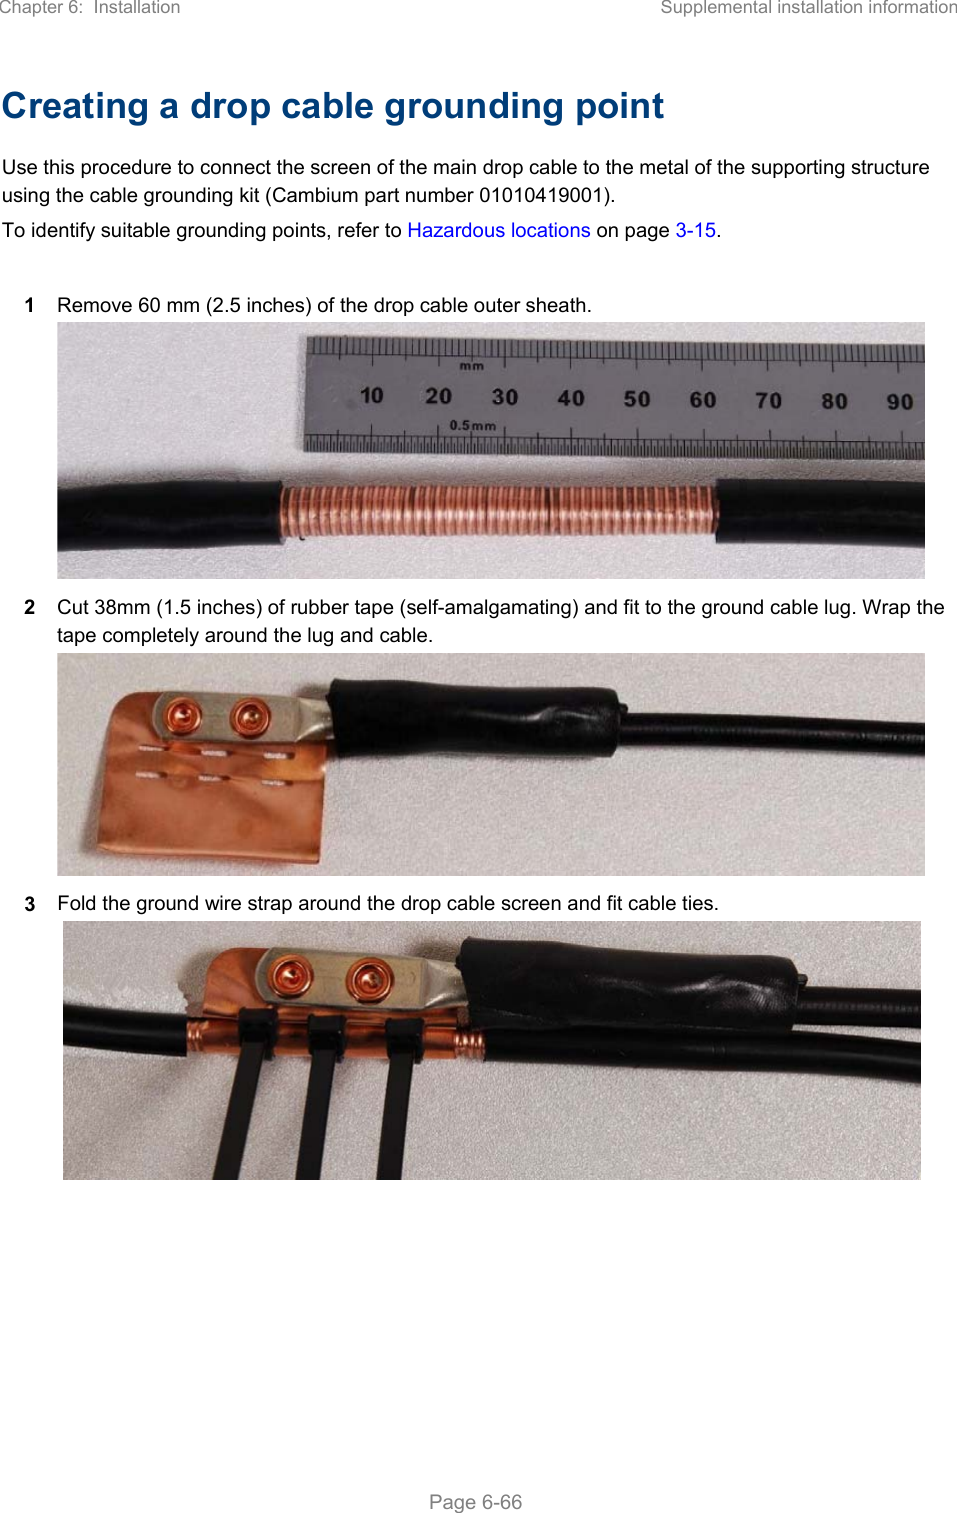 Chapter 6:  Installation  Supplemental installation information   Page 6-66 Creating a drop cable grounding point Use this procedure to connect the screen of the main drop cable to the metal of the supporting structure using the cable grounding kit (Cambium part number 01010419001). To identify suitable grounding points, refer to Hazardous locations on page 3-15.  1  Remove 60 mm (2.5 inches) of the drop cable outer sheath.  2  Cut 38mm (1.5 inches) of rubber tape (self-amalgamating) and fit to the ground cable lug. Wrap the tape completely around the lug and cable.  3  Fold the ground wire strap around the drop cable screen and fit cable ties.    